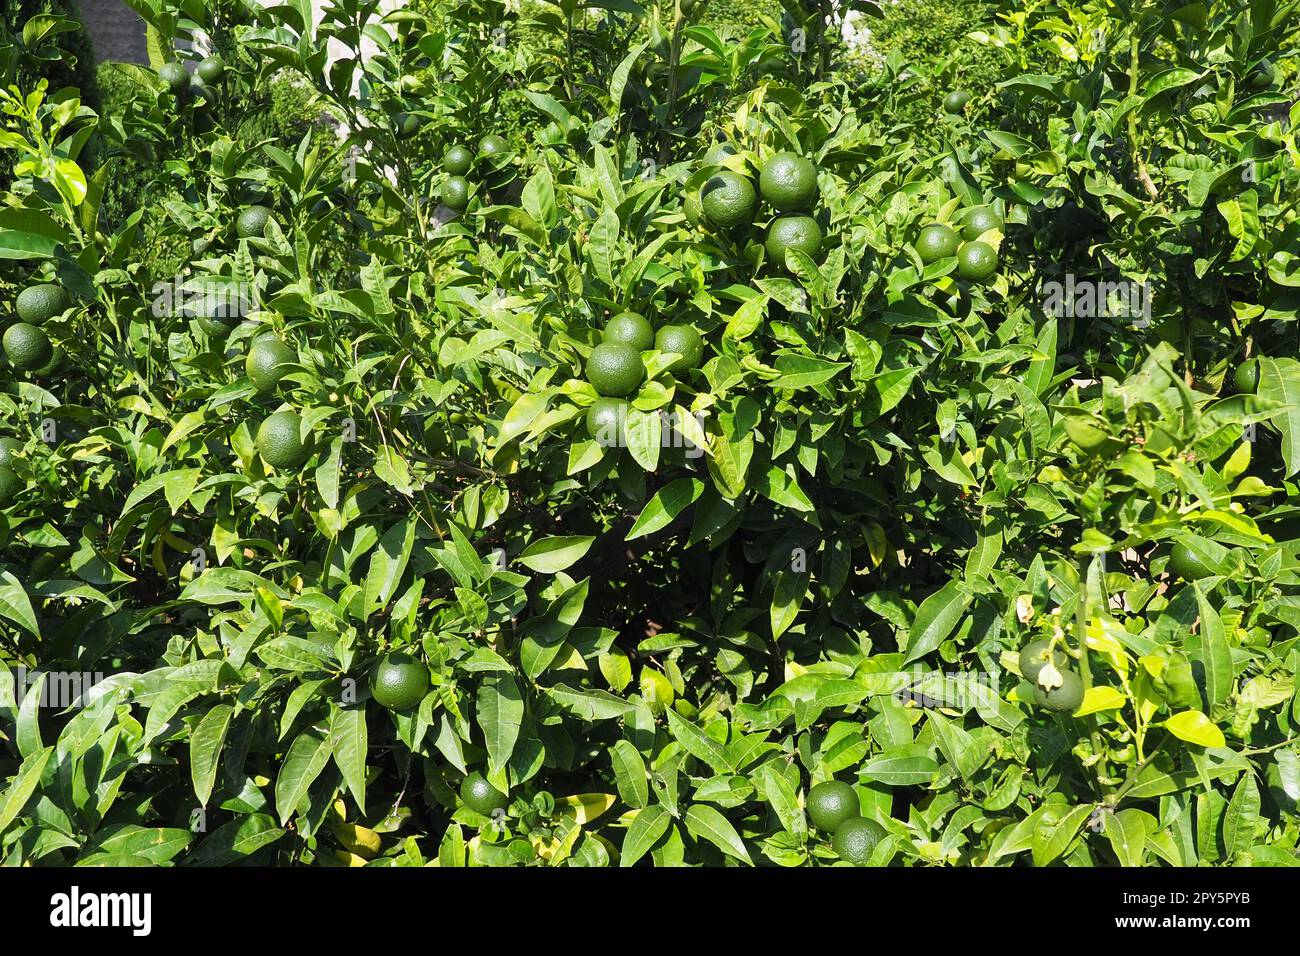 Orange tree with green oranges. Orange Citrus sinensis is a fruit tree, a species of the genus Citrus of the Rutaceae family, an edible unripe fruit. Gardening and agriculture. Green orange leaves. Stock Photo